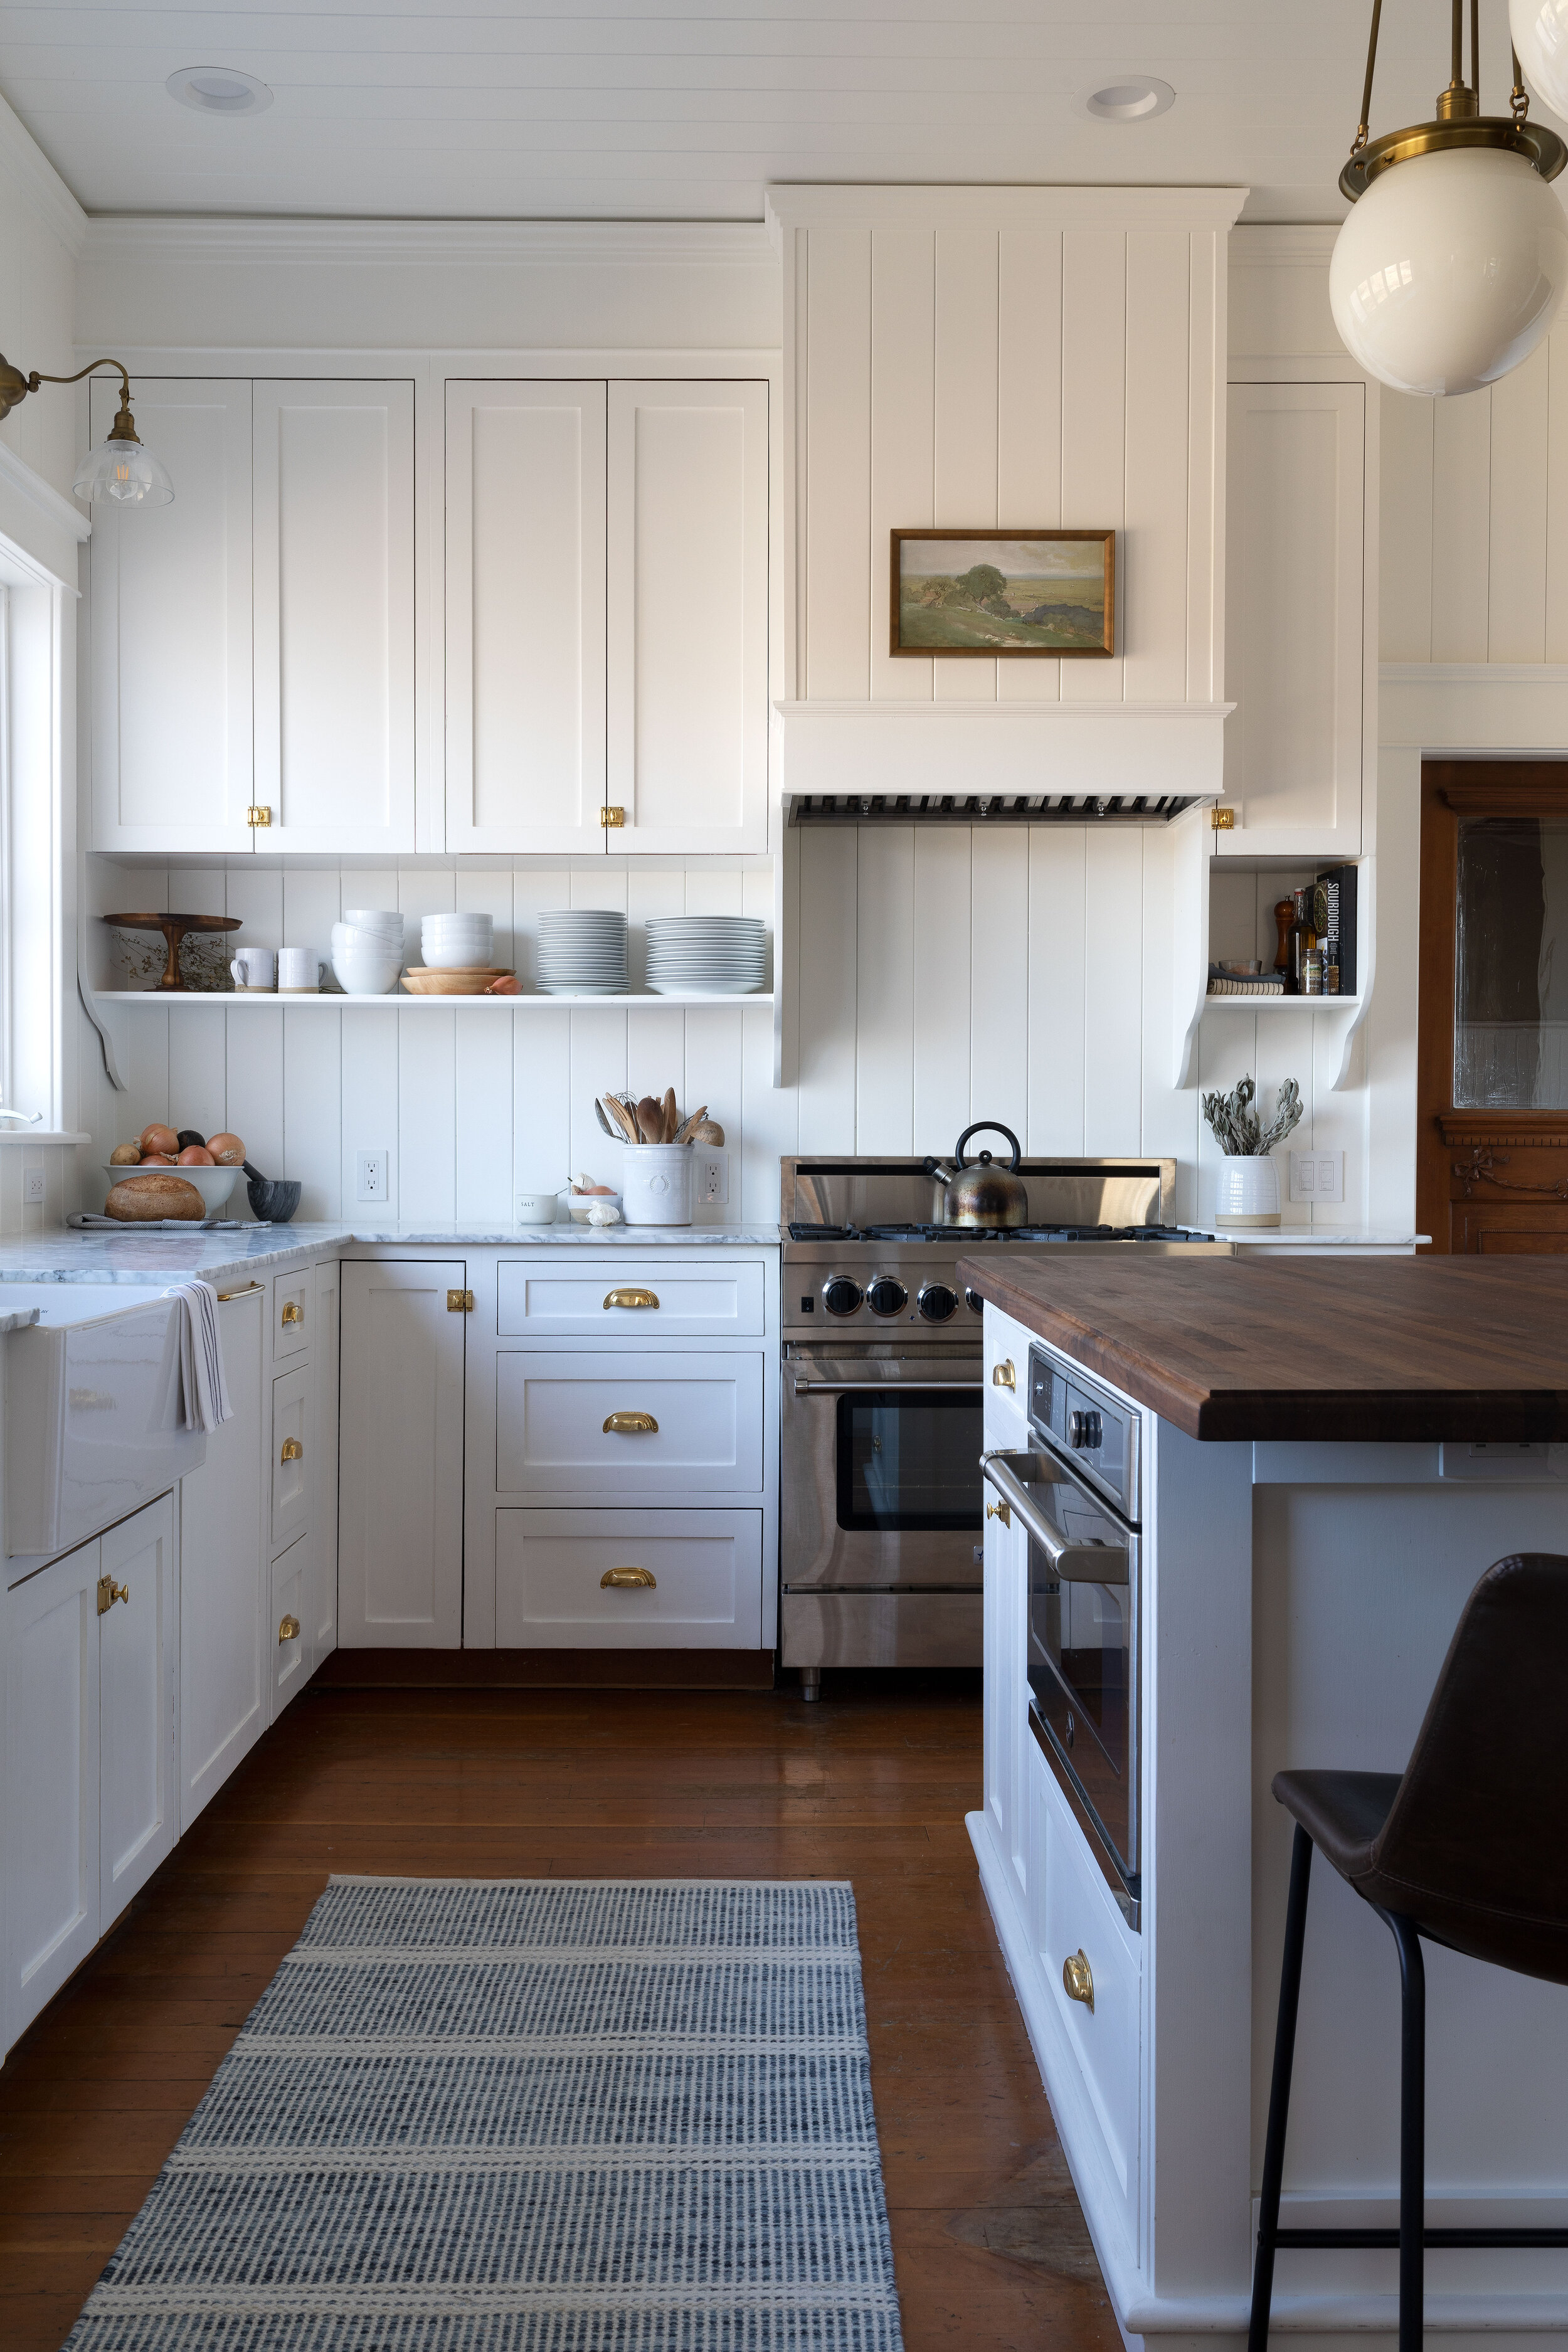 Why We Added a Backsplash To our Range (+ How the Paneling is Holding Up) —  The Grit and Polish